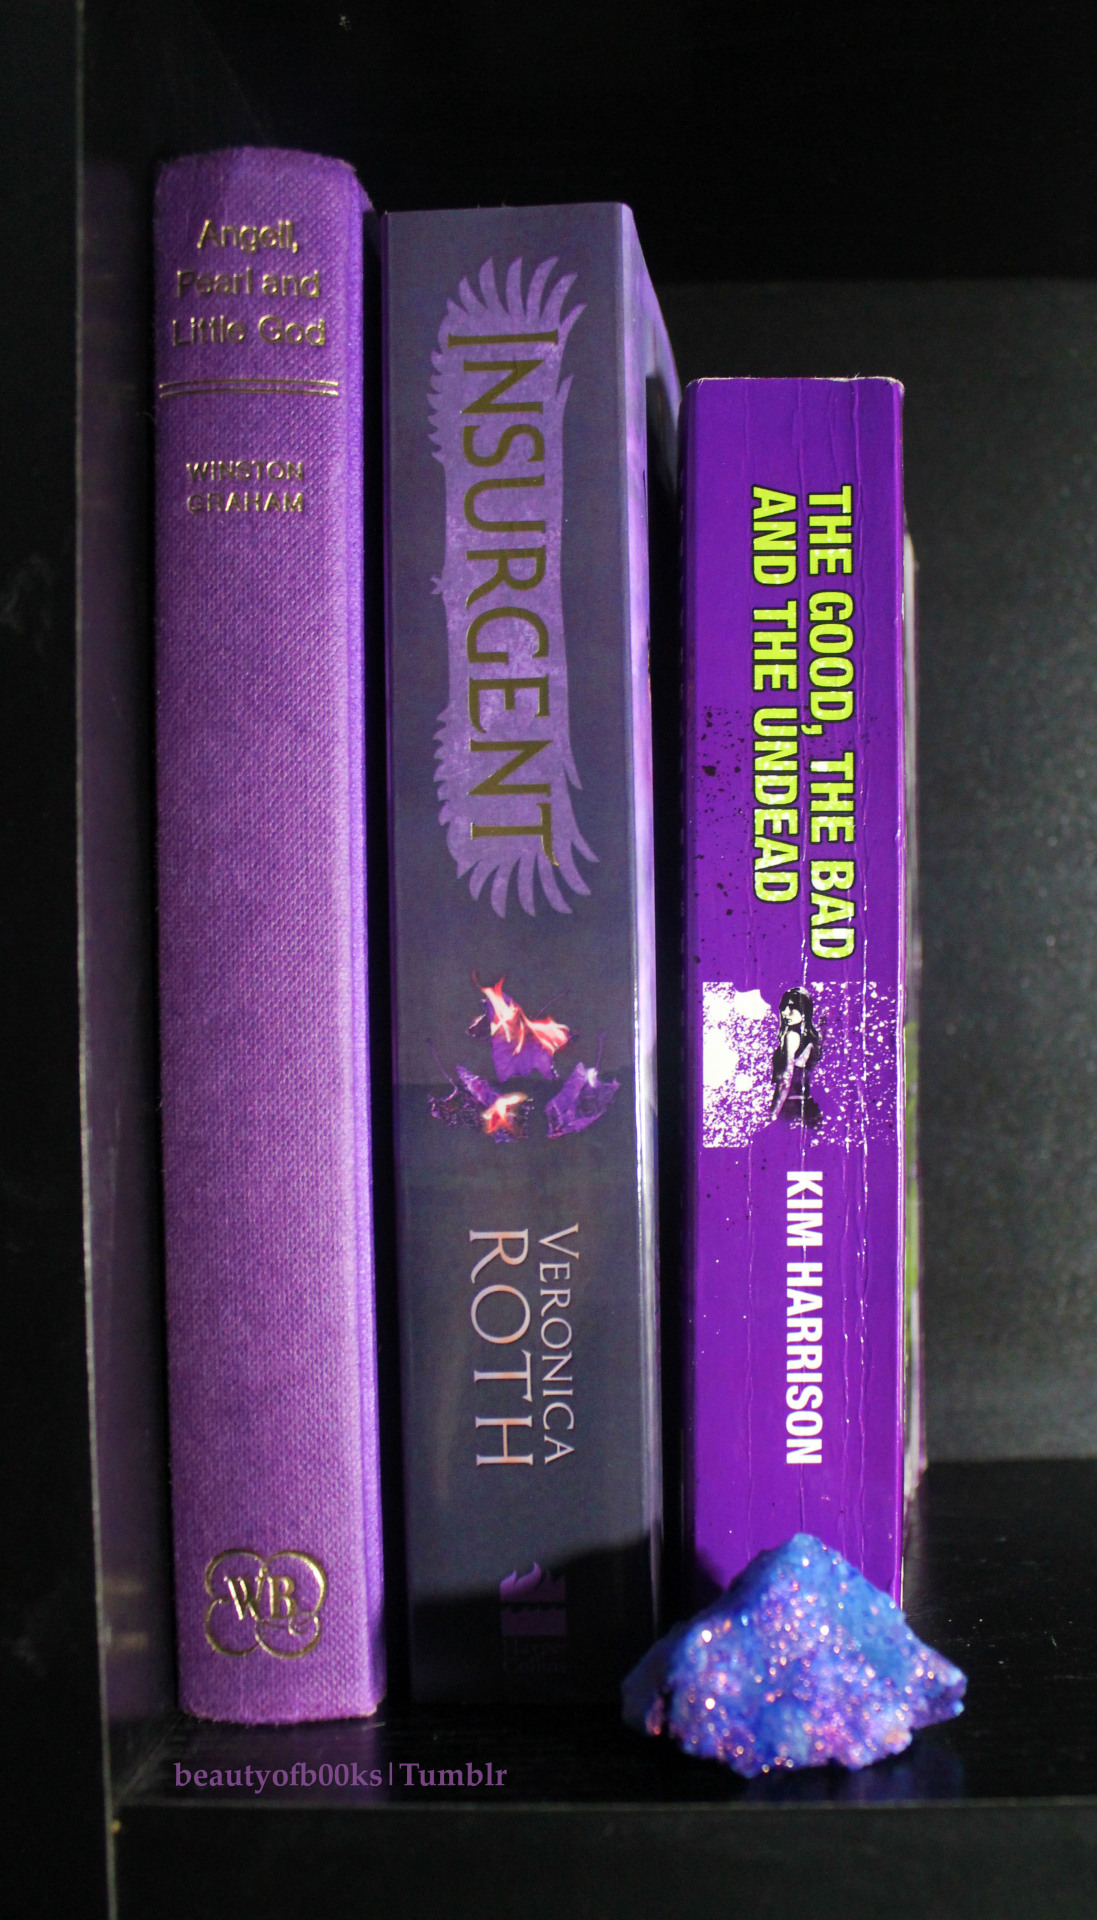 slytherin-bookworm-guy:
“Purple books (I don’t own many I know)
”